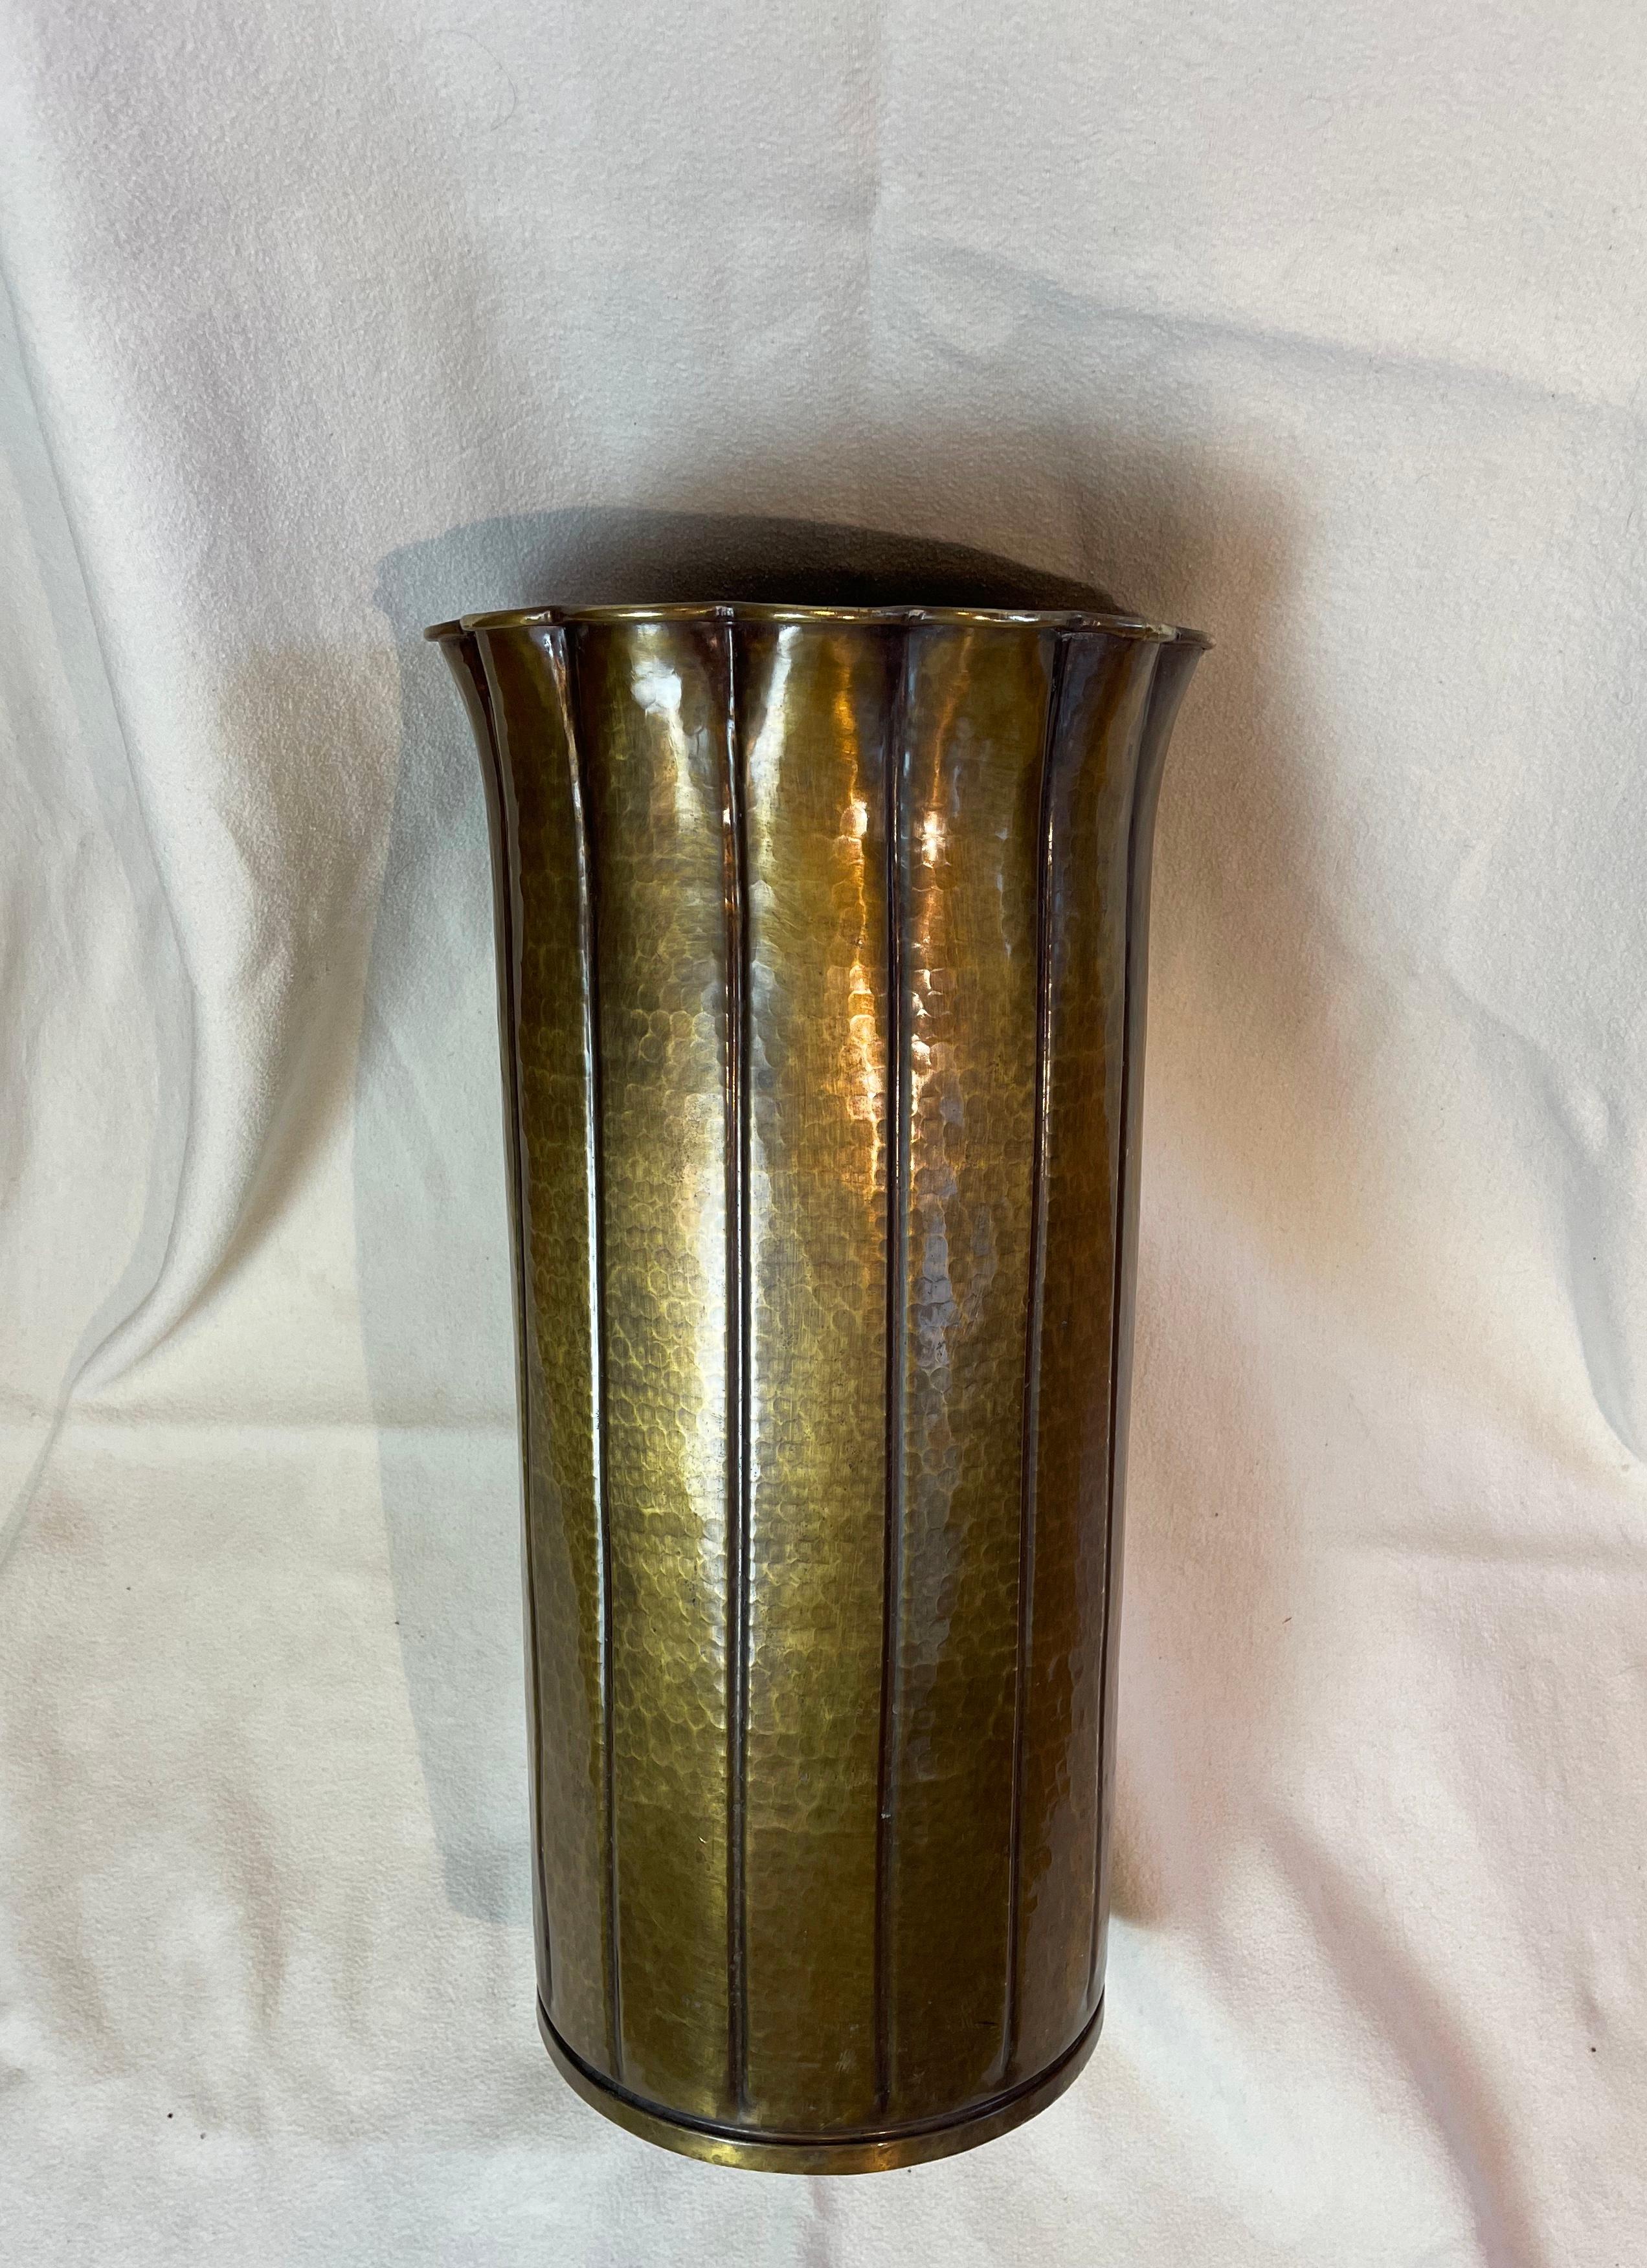 Fantastic umbrella stand in a hammered brass, Hollywood Regency style with a vive of art deco!
Lovely heavy brass with a fluting design which is opening like petals at the top.
The inner base gains weight through a cement cast layer.
Comes with a